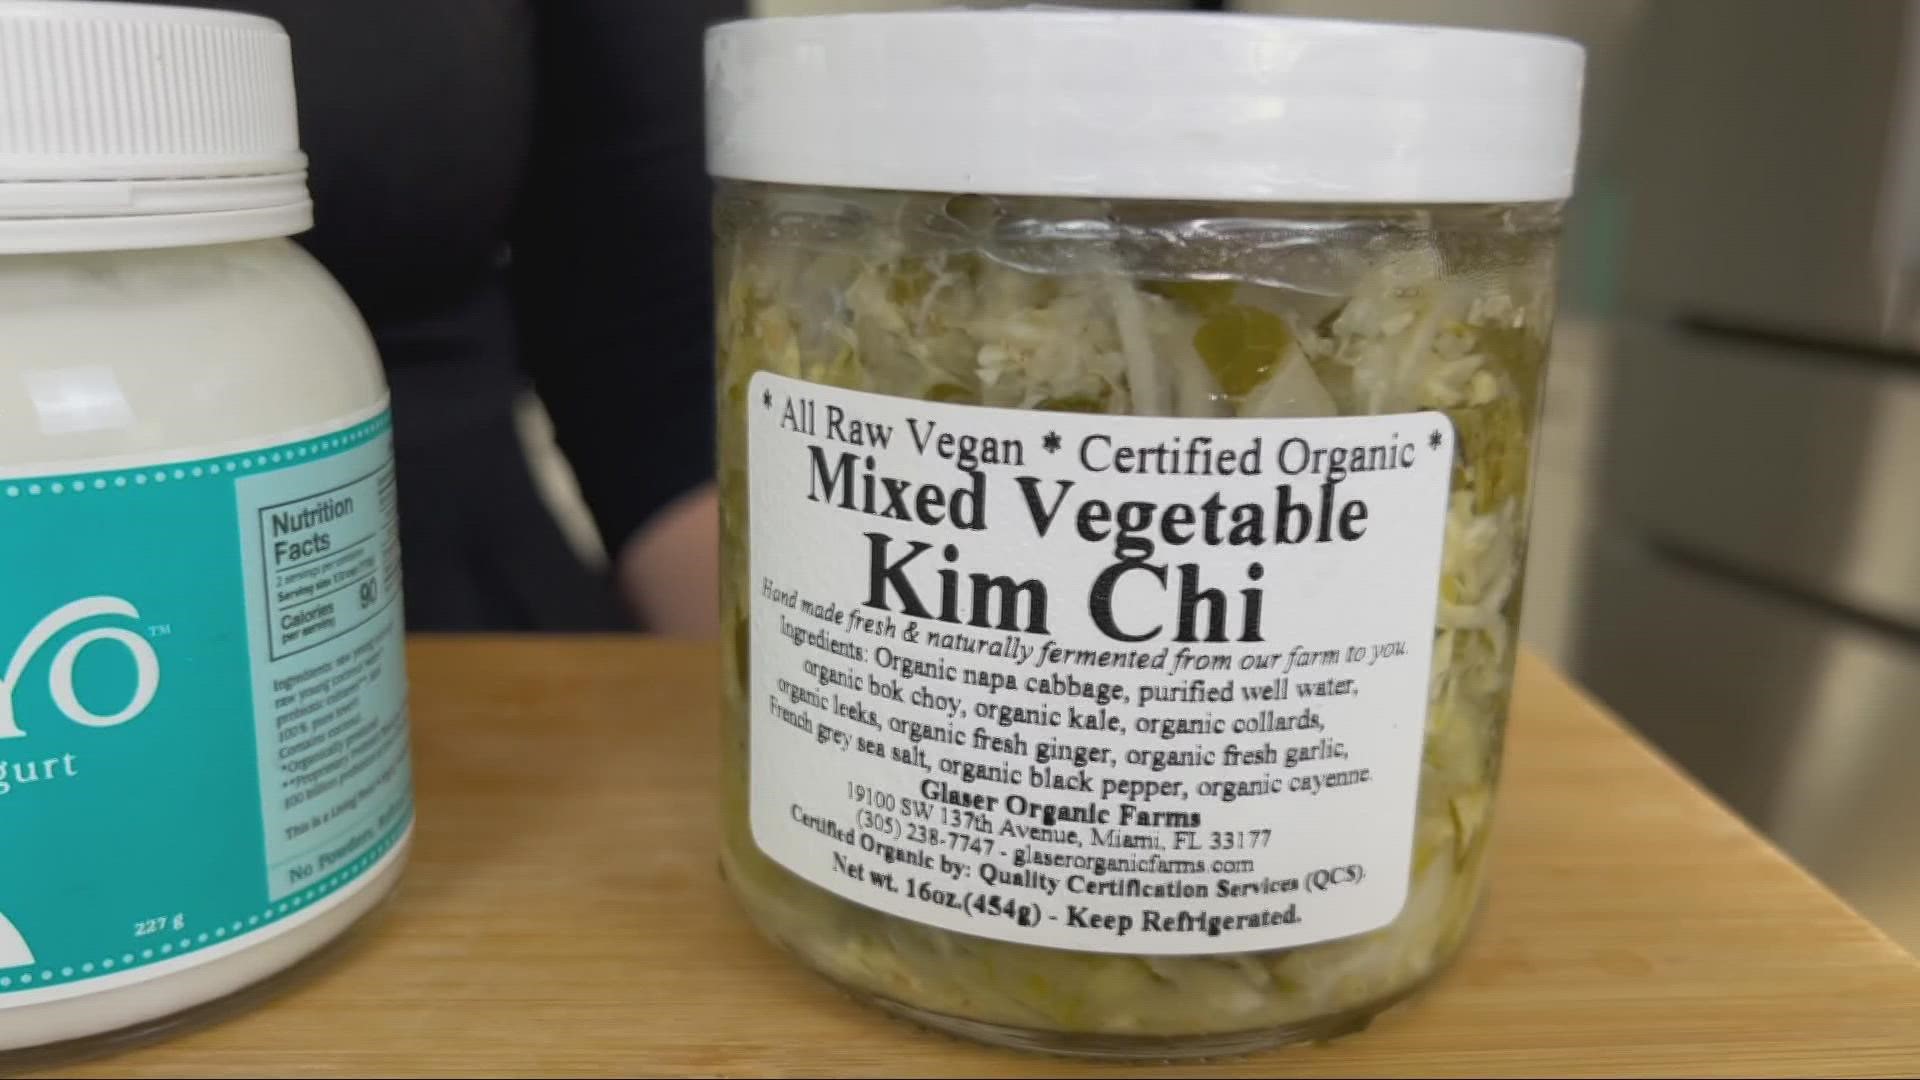 Fermented foods help to promote better gut health by feeding the good bacteria that live there.